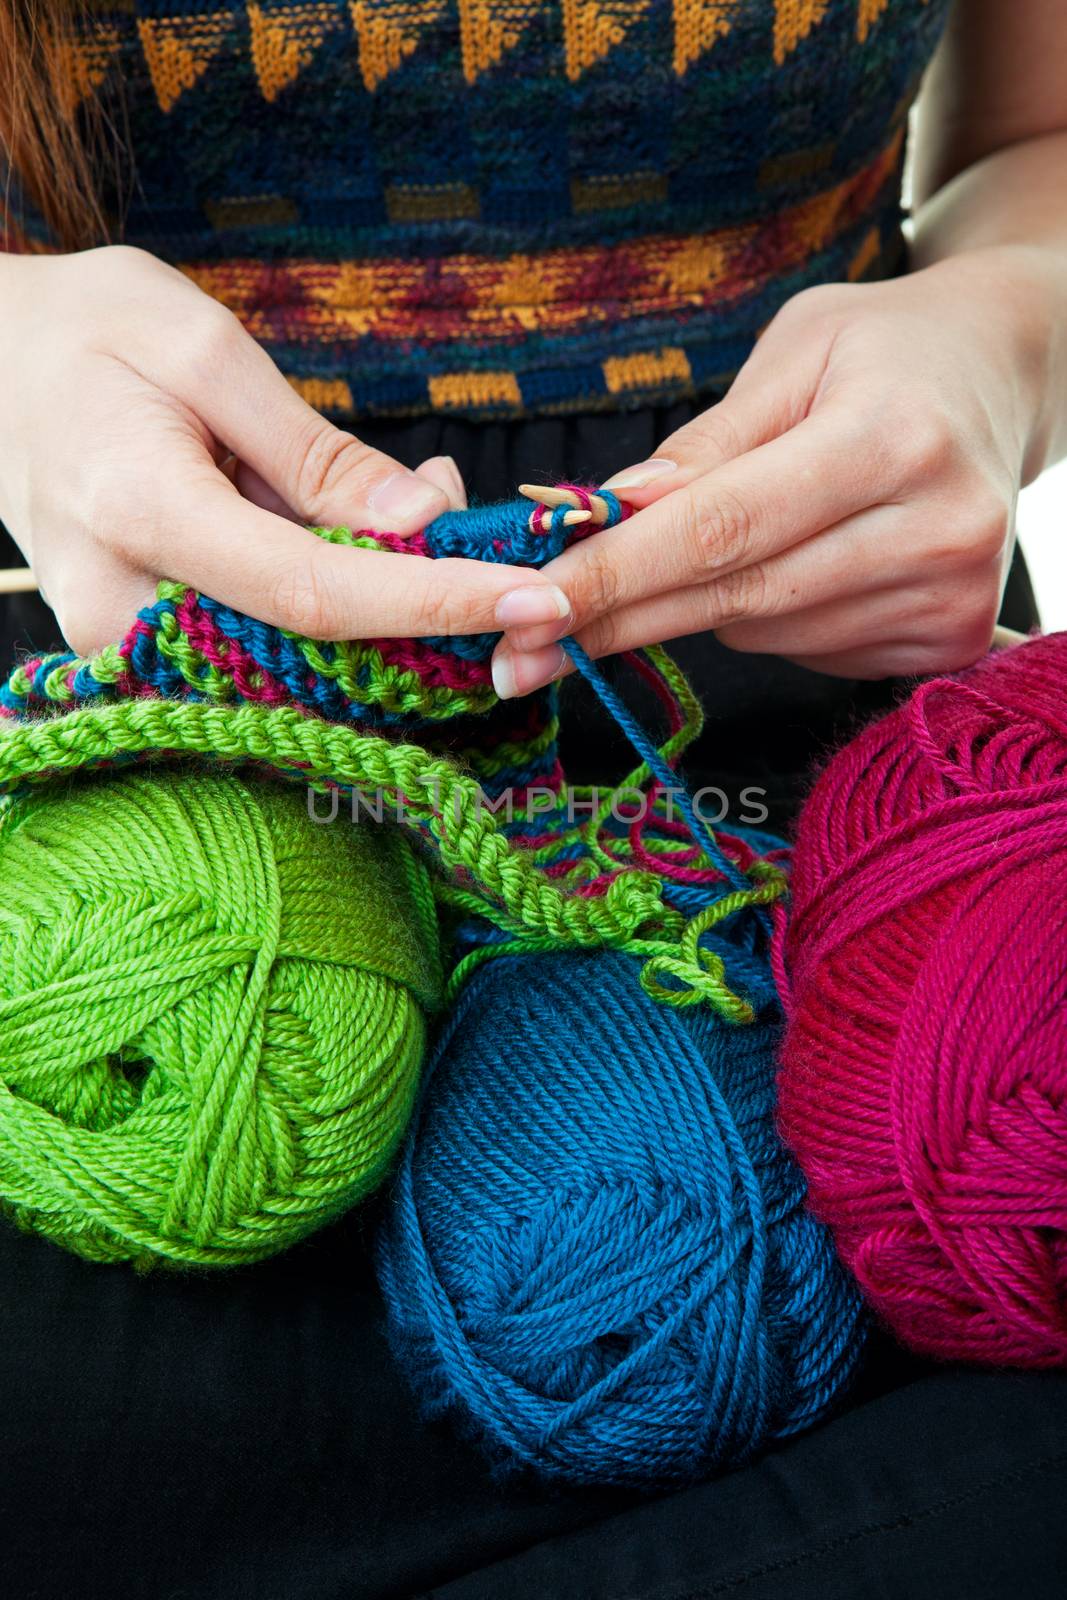 A woman's hands knitting with three colors of yarn.